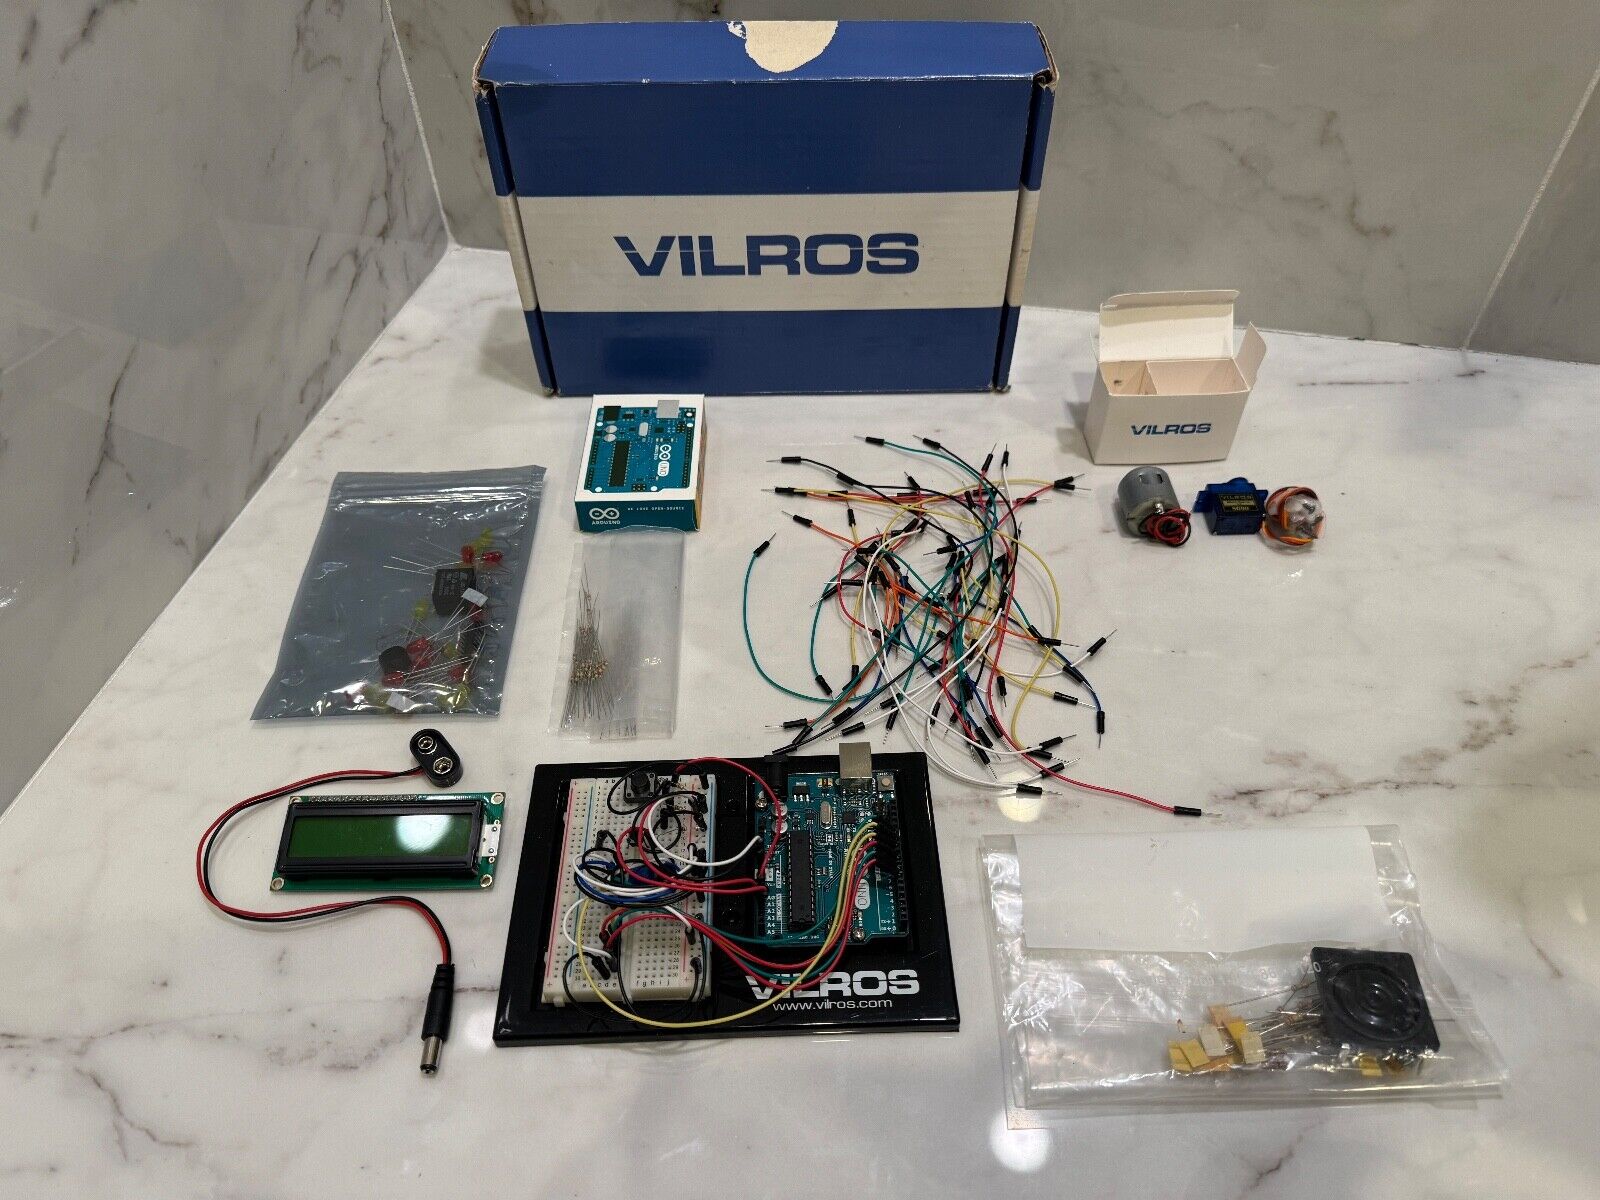 Vilros Starter Unknown Kit Mixed Items  - Uno & Breadboard, and Other Items